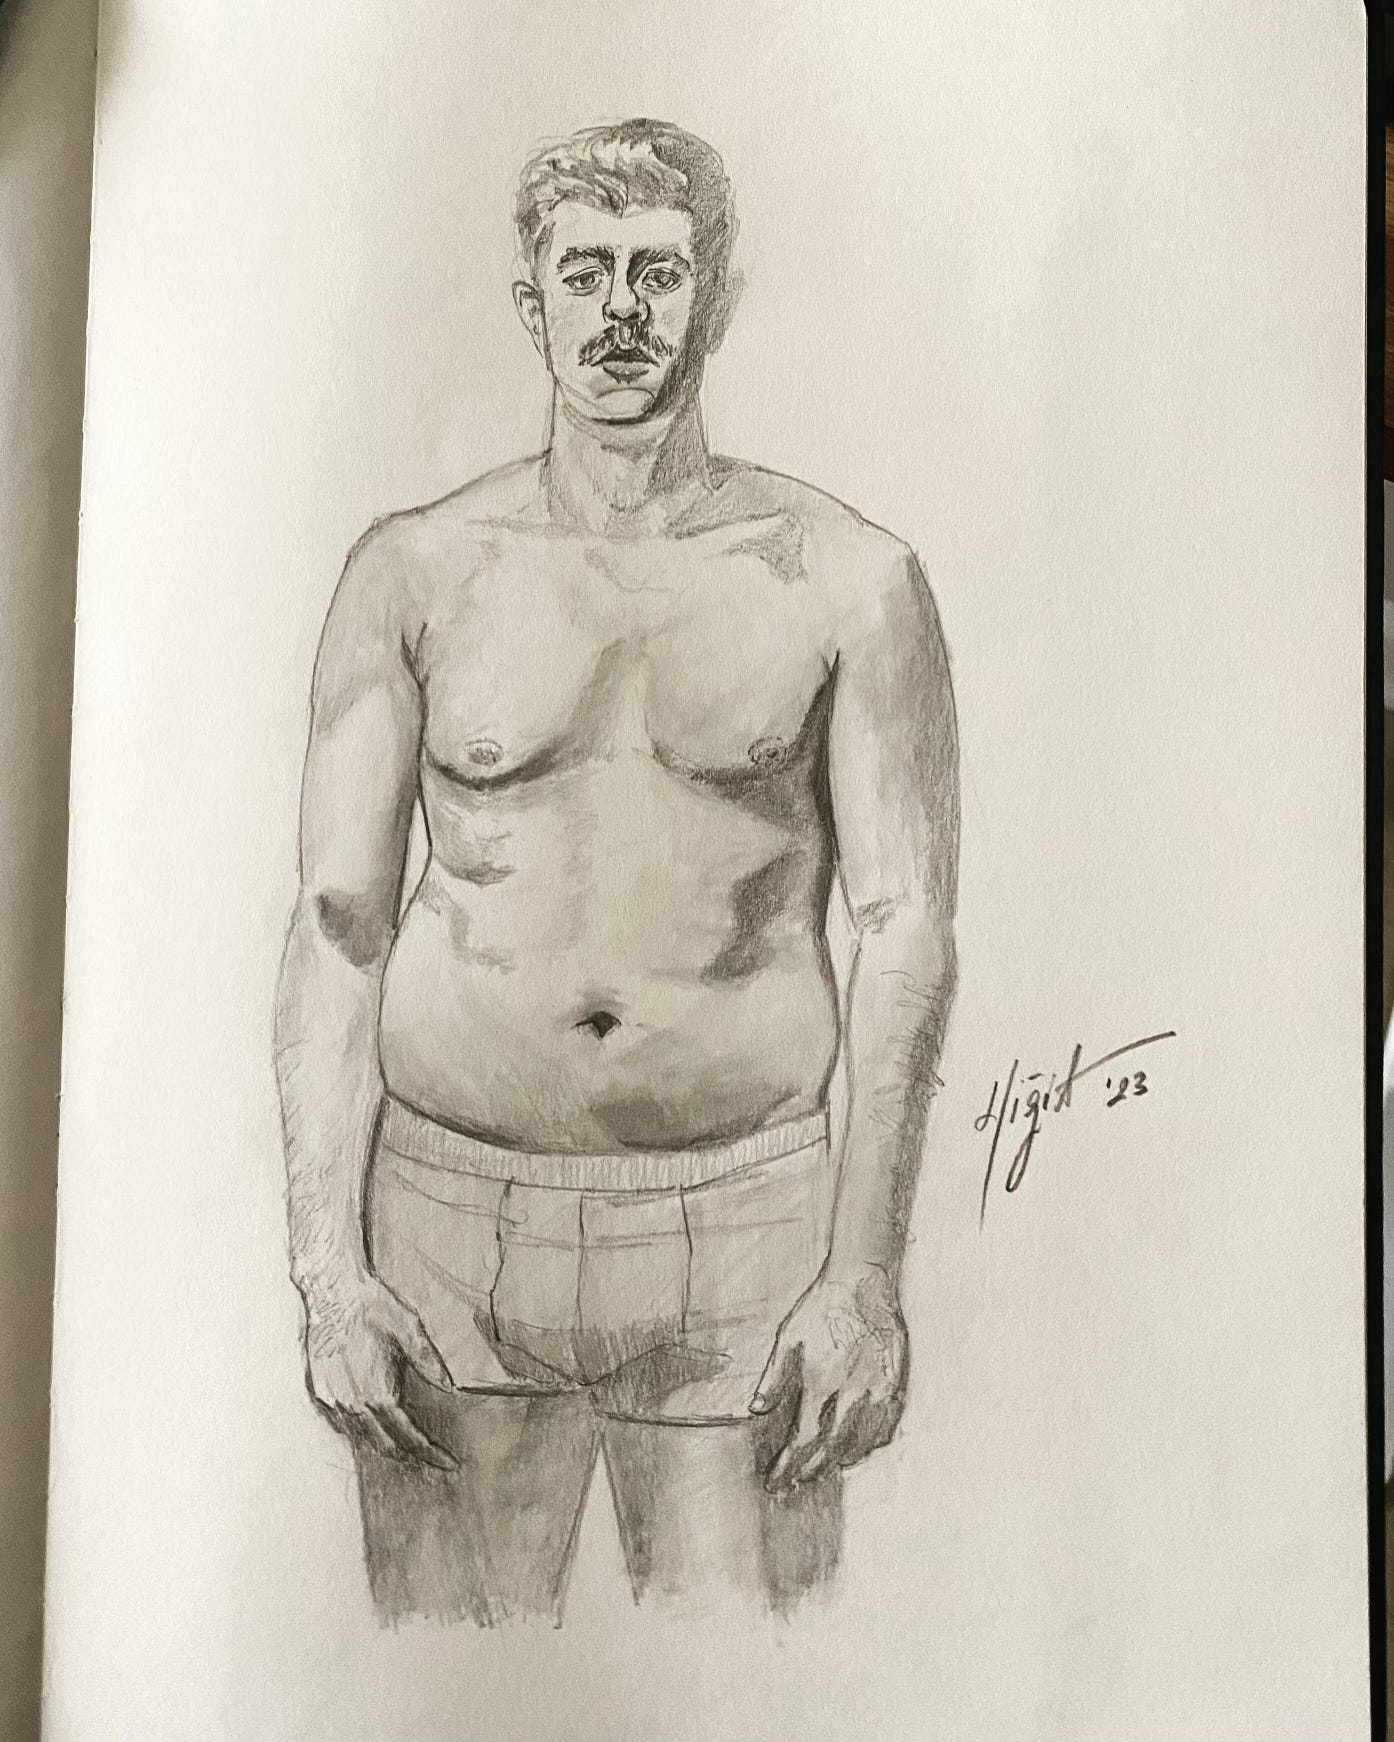 a pencil sketch of a pretty average, maybe slightly pudgy mustached man in his boxer shorts